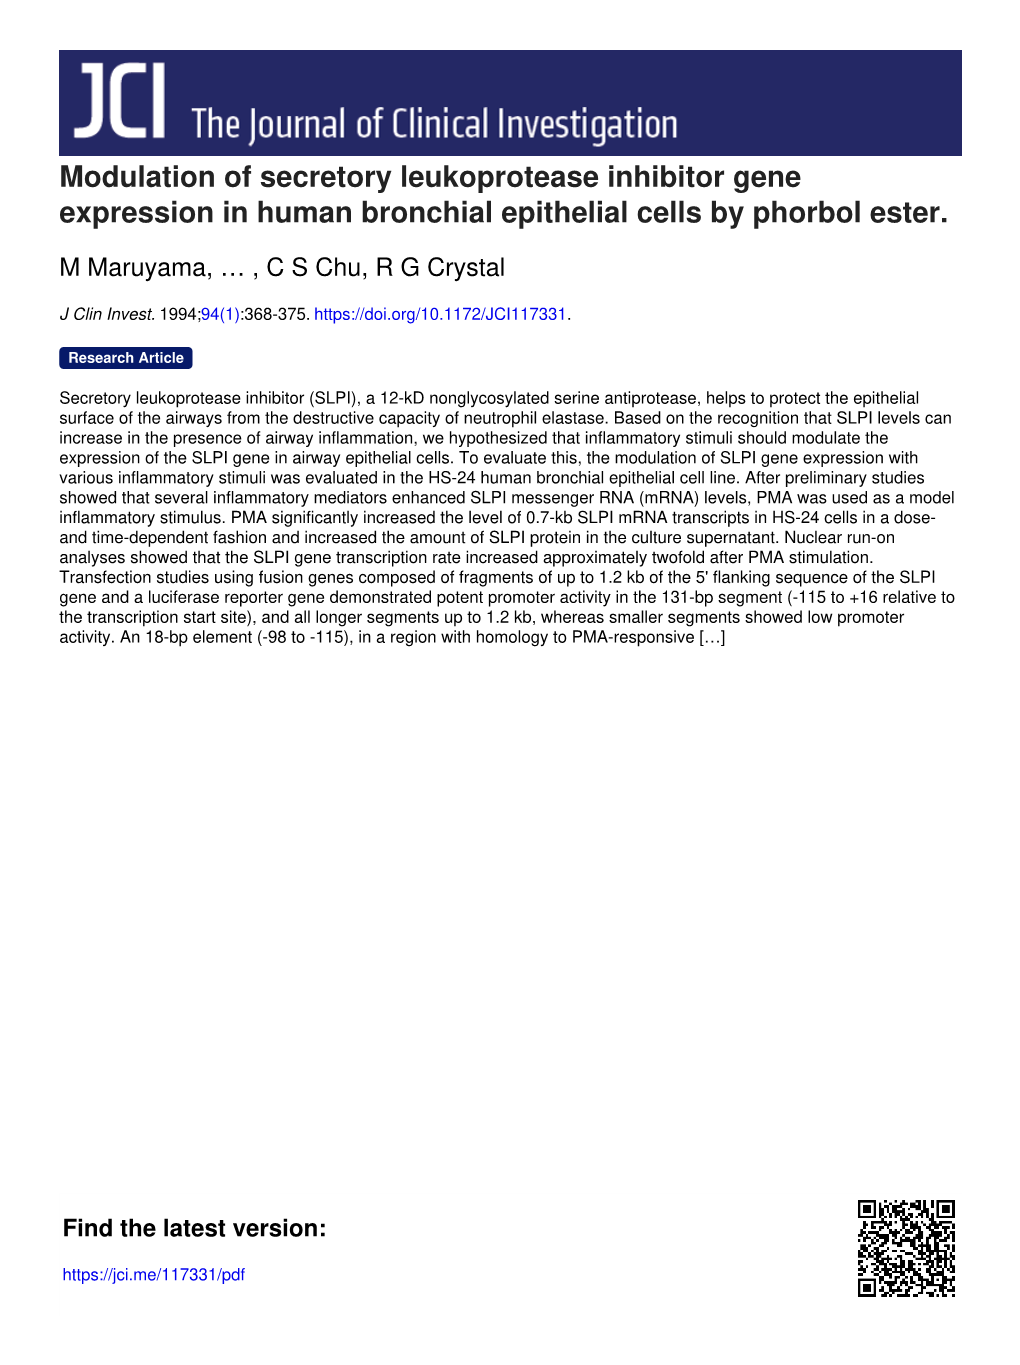 Modulation of Secretory Leukoprotease Inhibitor Gene Expression in Human Bronchial Epithelial Cells by Phorbol Ester